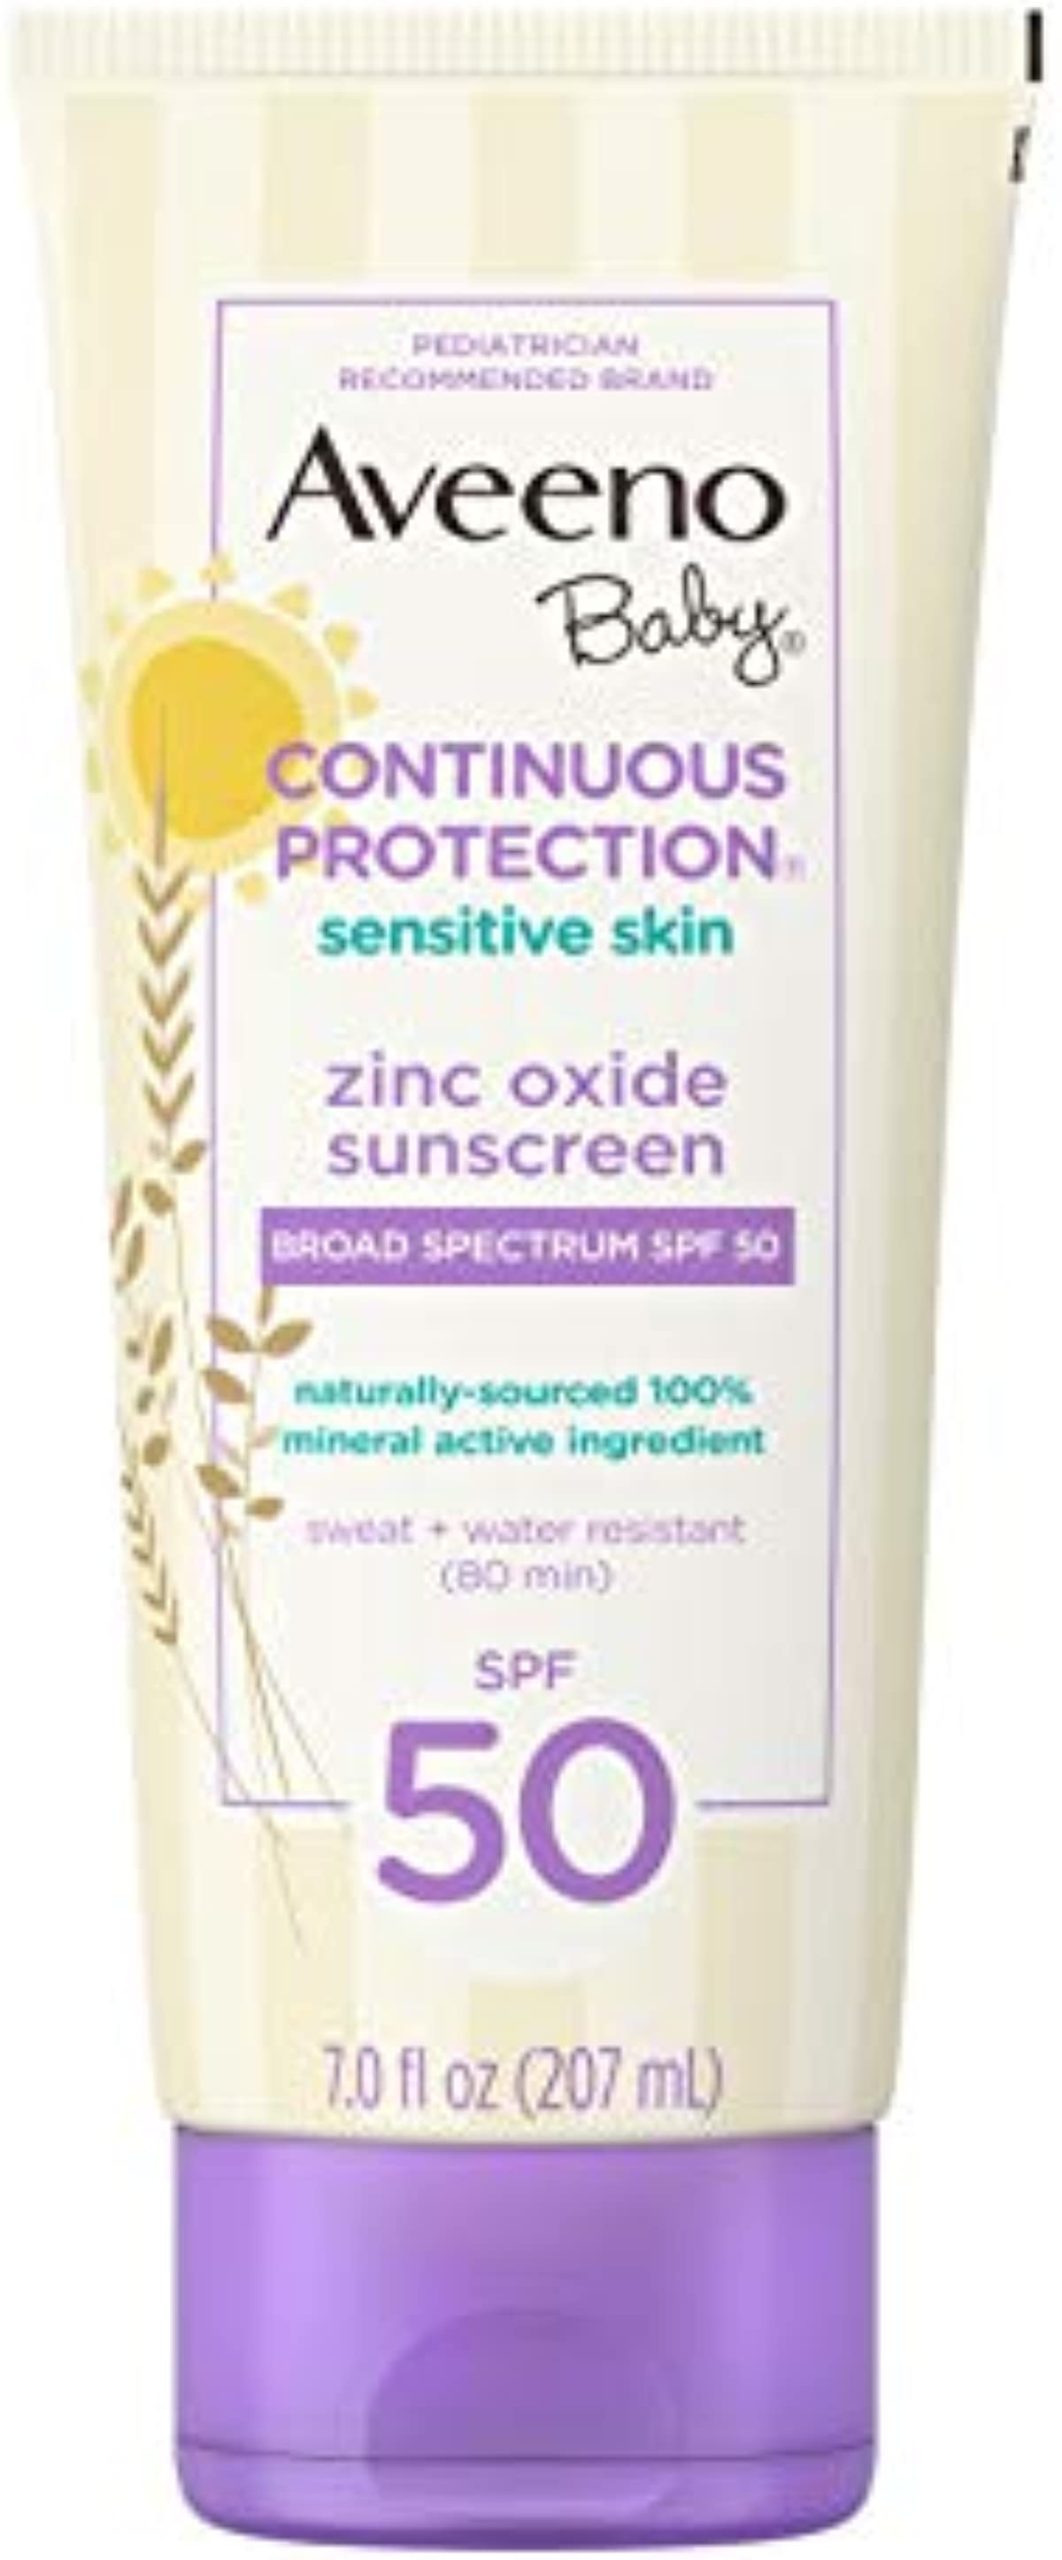 Aveeno Baby Continuous Protection Zinc Oxide Mineral Sunscreen Lotion for Sensitive Skin, Broad Spectrum SPF 50, Tear-Free, Sweat- & Water-Resistant, Paraben-Free, Non-Greasy, 7 fl. oz